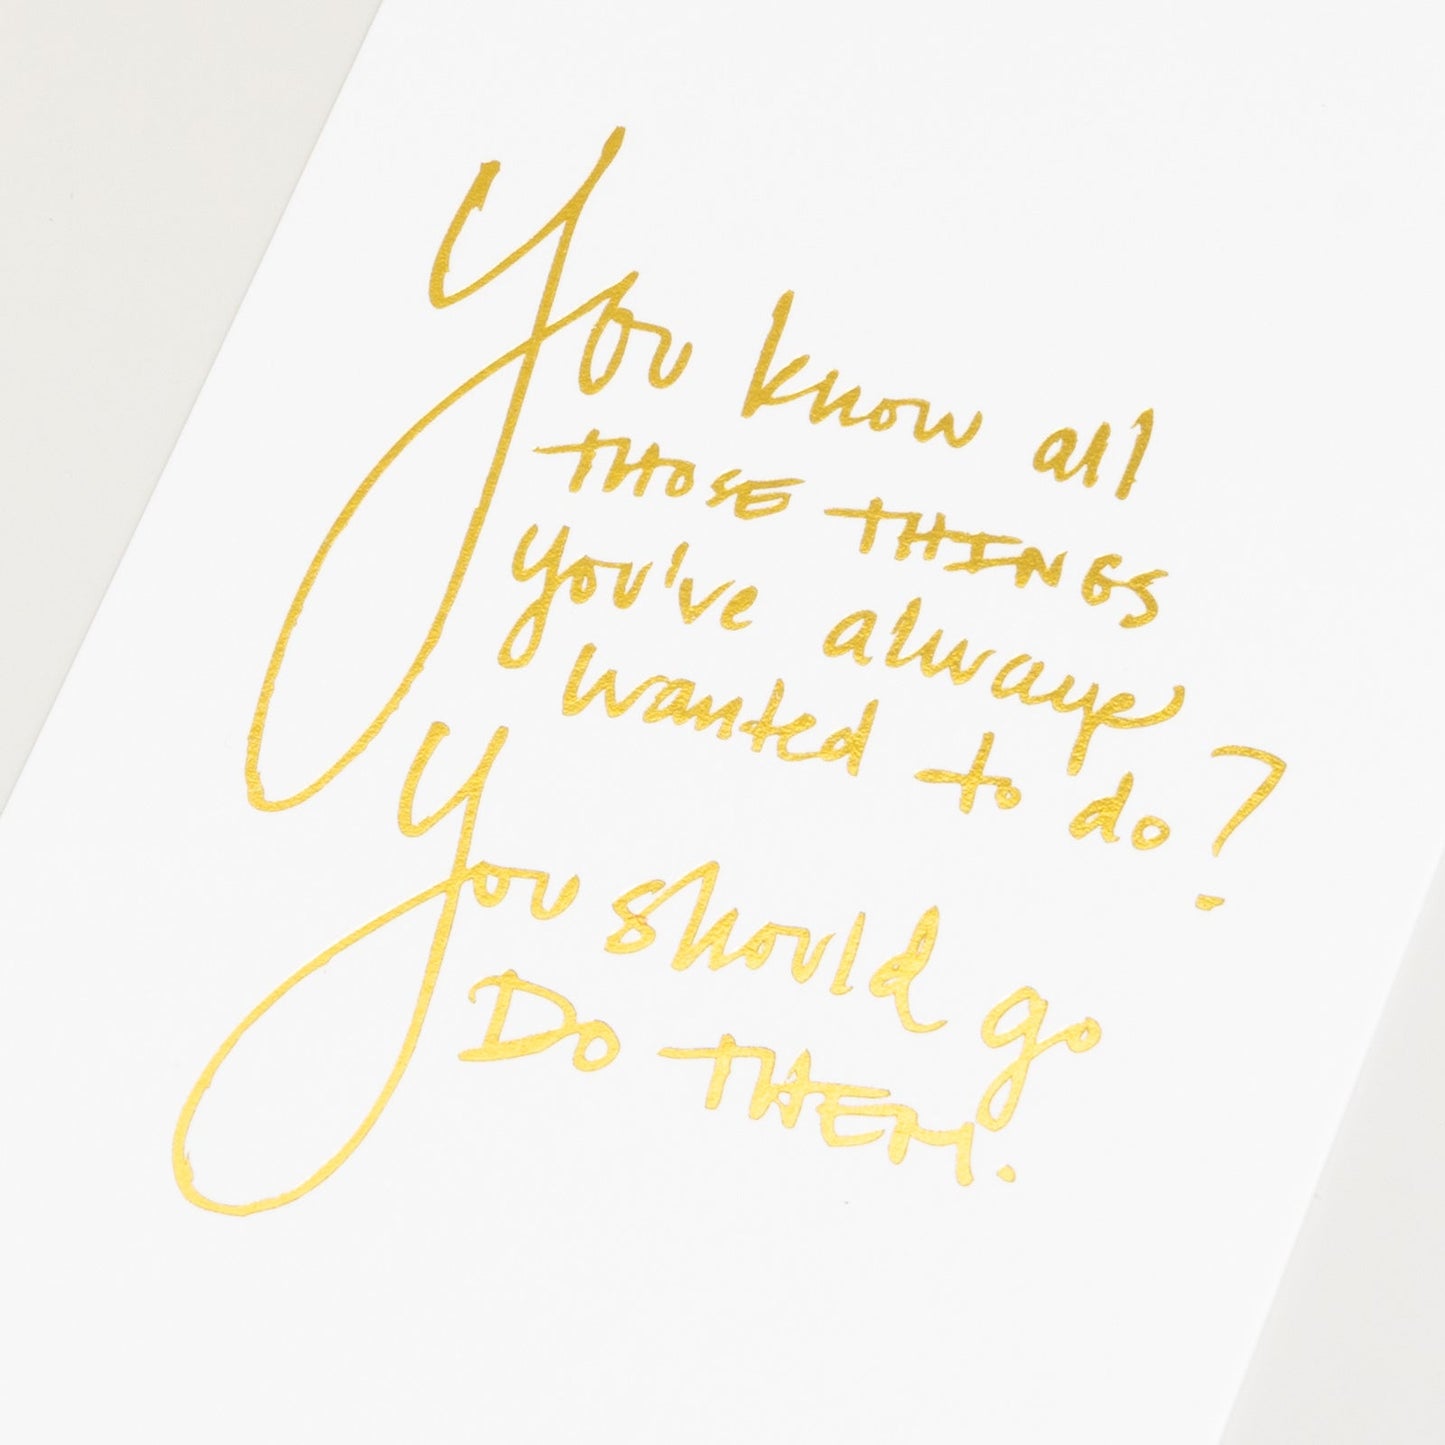 Cultivate What Matters - Art Print - You Know All Those Things - Gold Foil 